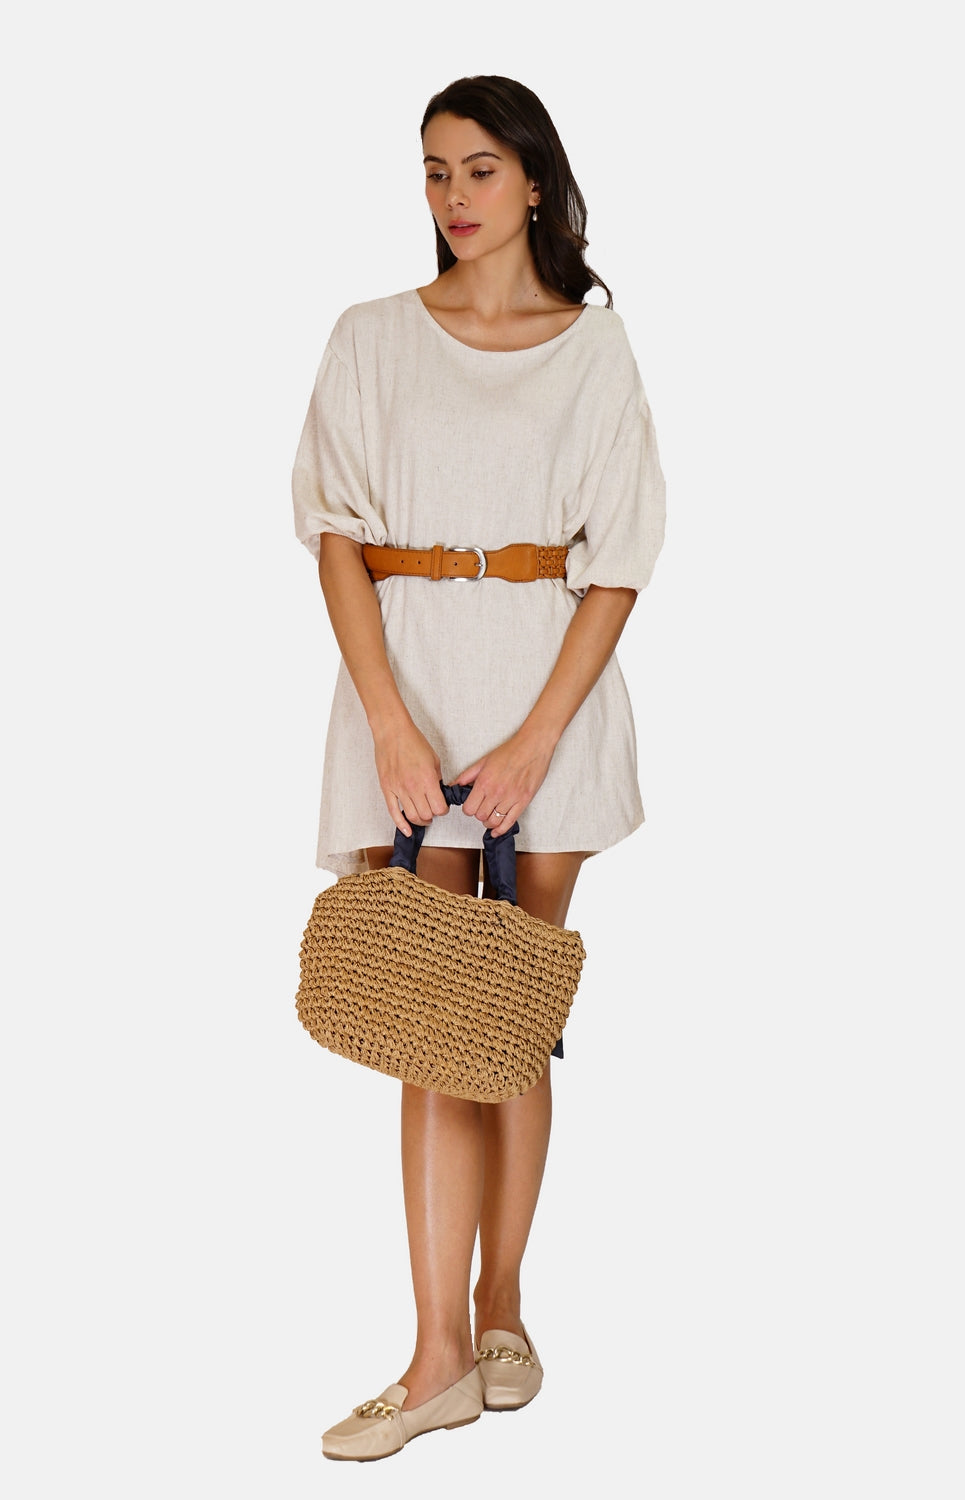 Wide back buttoned dress with mid-length sleeves